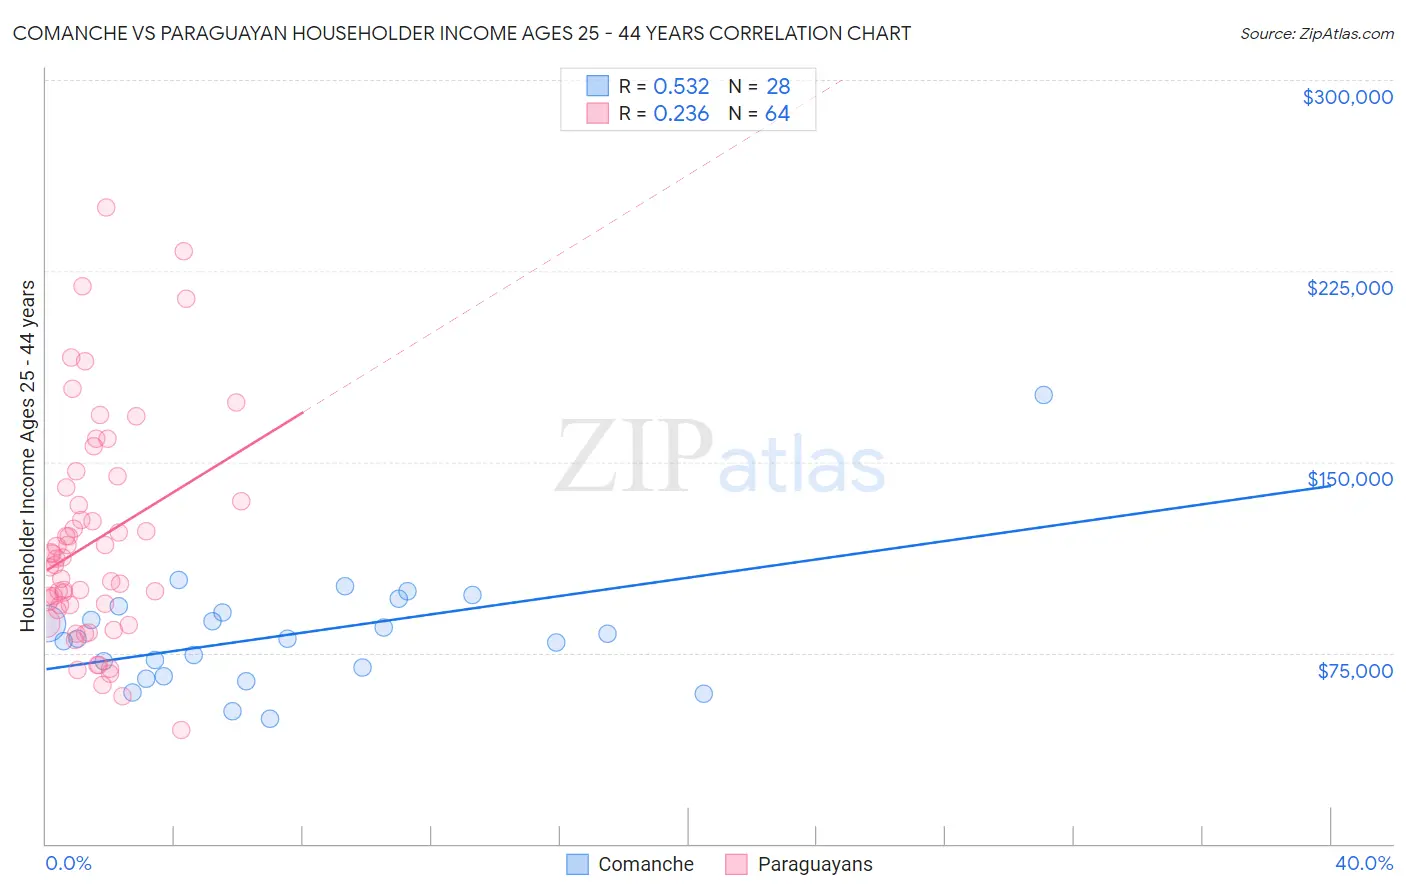 Comanche vs Paraguayan Householder Income Ages 25 - 44 years